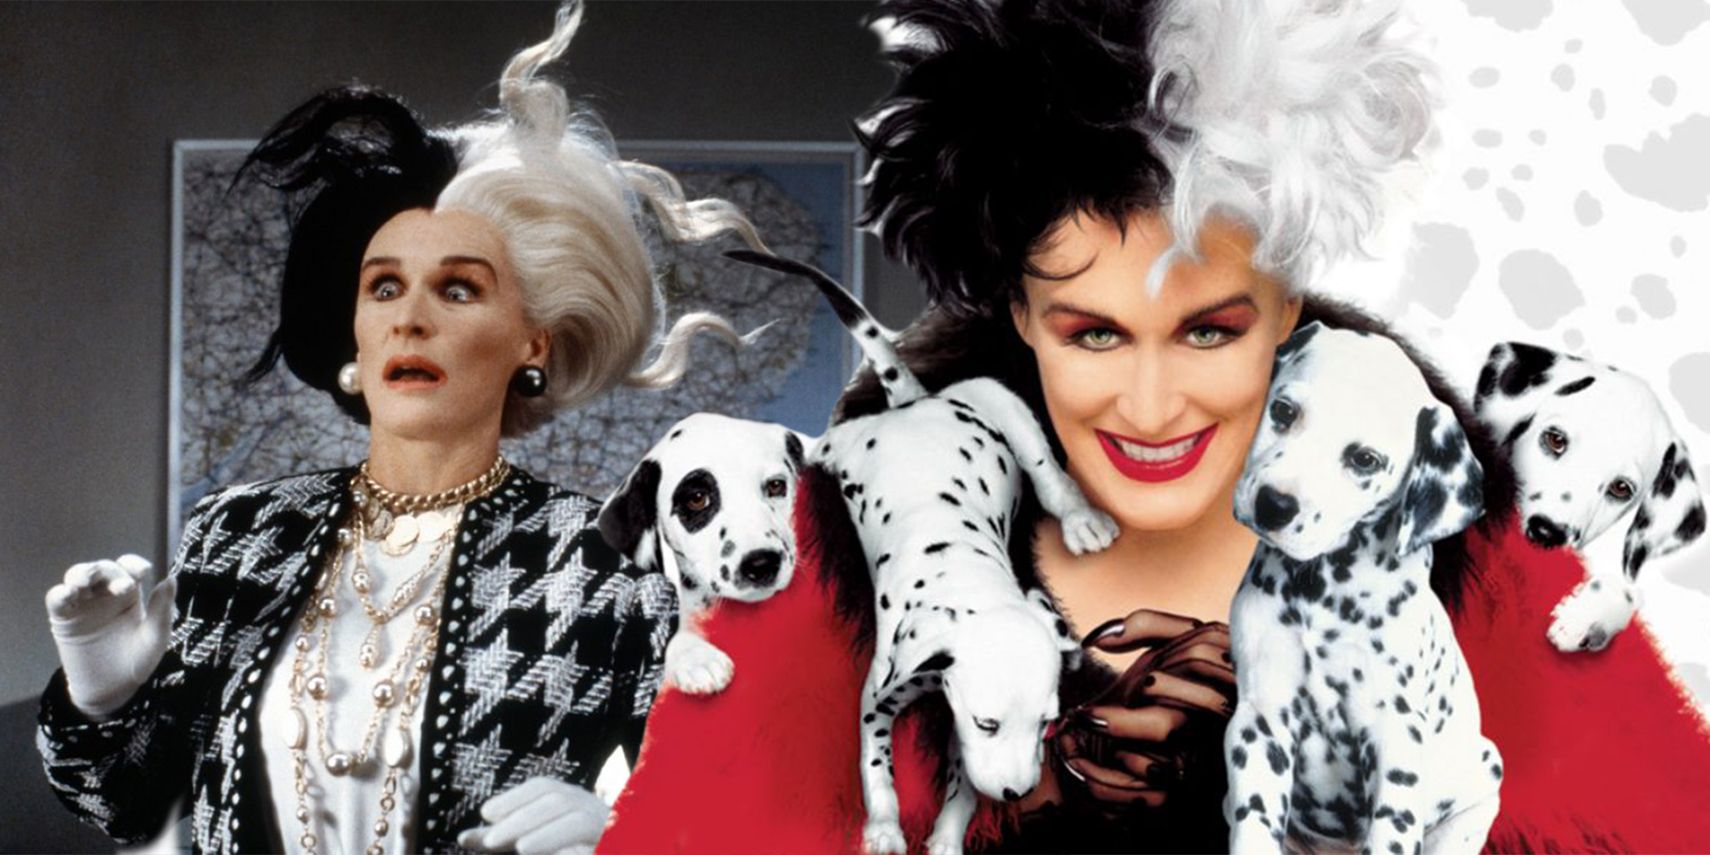 Split image of Cruella De vil close-ups on the 101 Dalmations franchise, surrounded by dogs